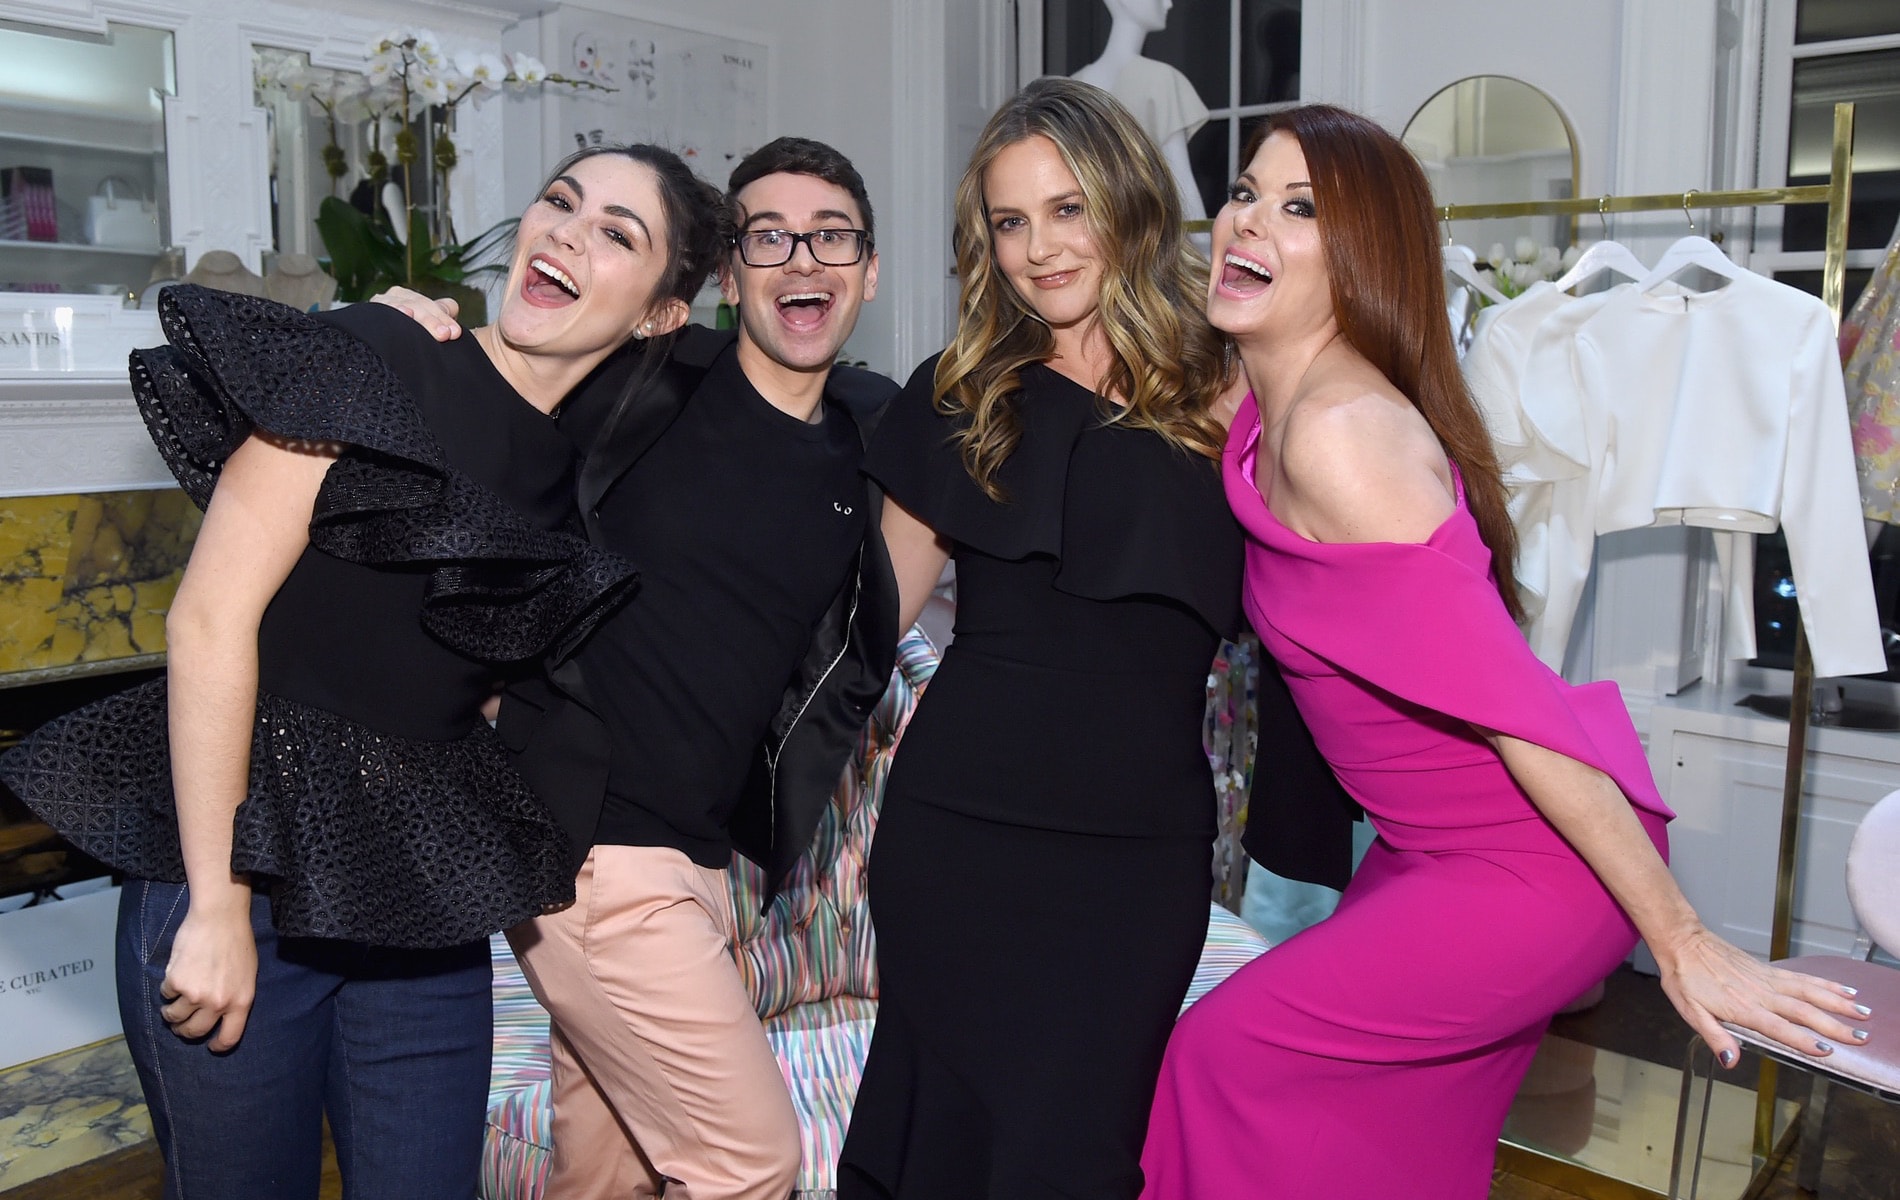 Isabelle Fuhrman, Christian Siriano, Alicia Silverstone and Debra Messing attend the opening of Christian Siriano's new store, The Curated NYC, hosted by Alicia Silverstone and sponsored by VIE Magazine on April 17, 2018, in New York City. Photo by Jamie McCarthy/Getty Images for Christian Siriano